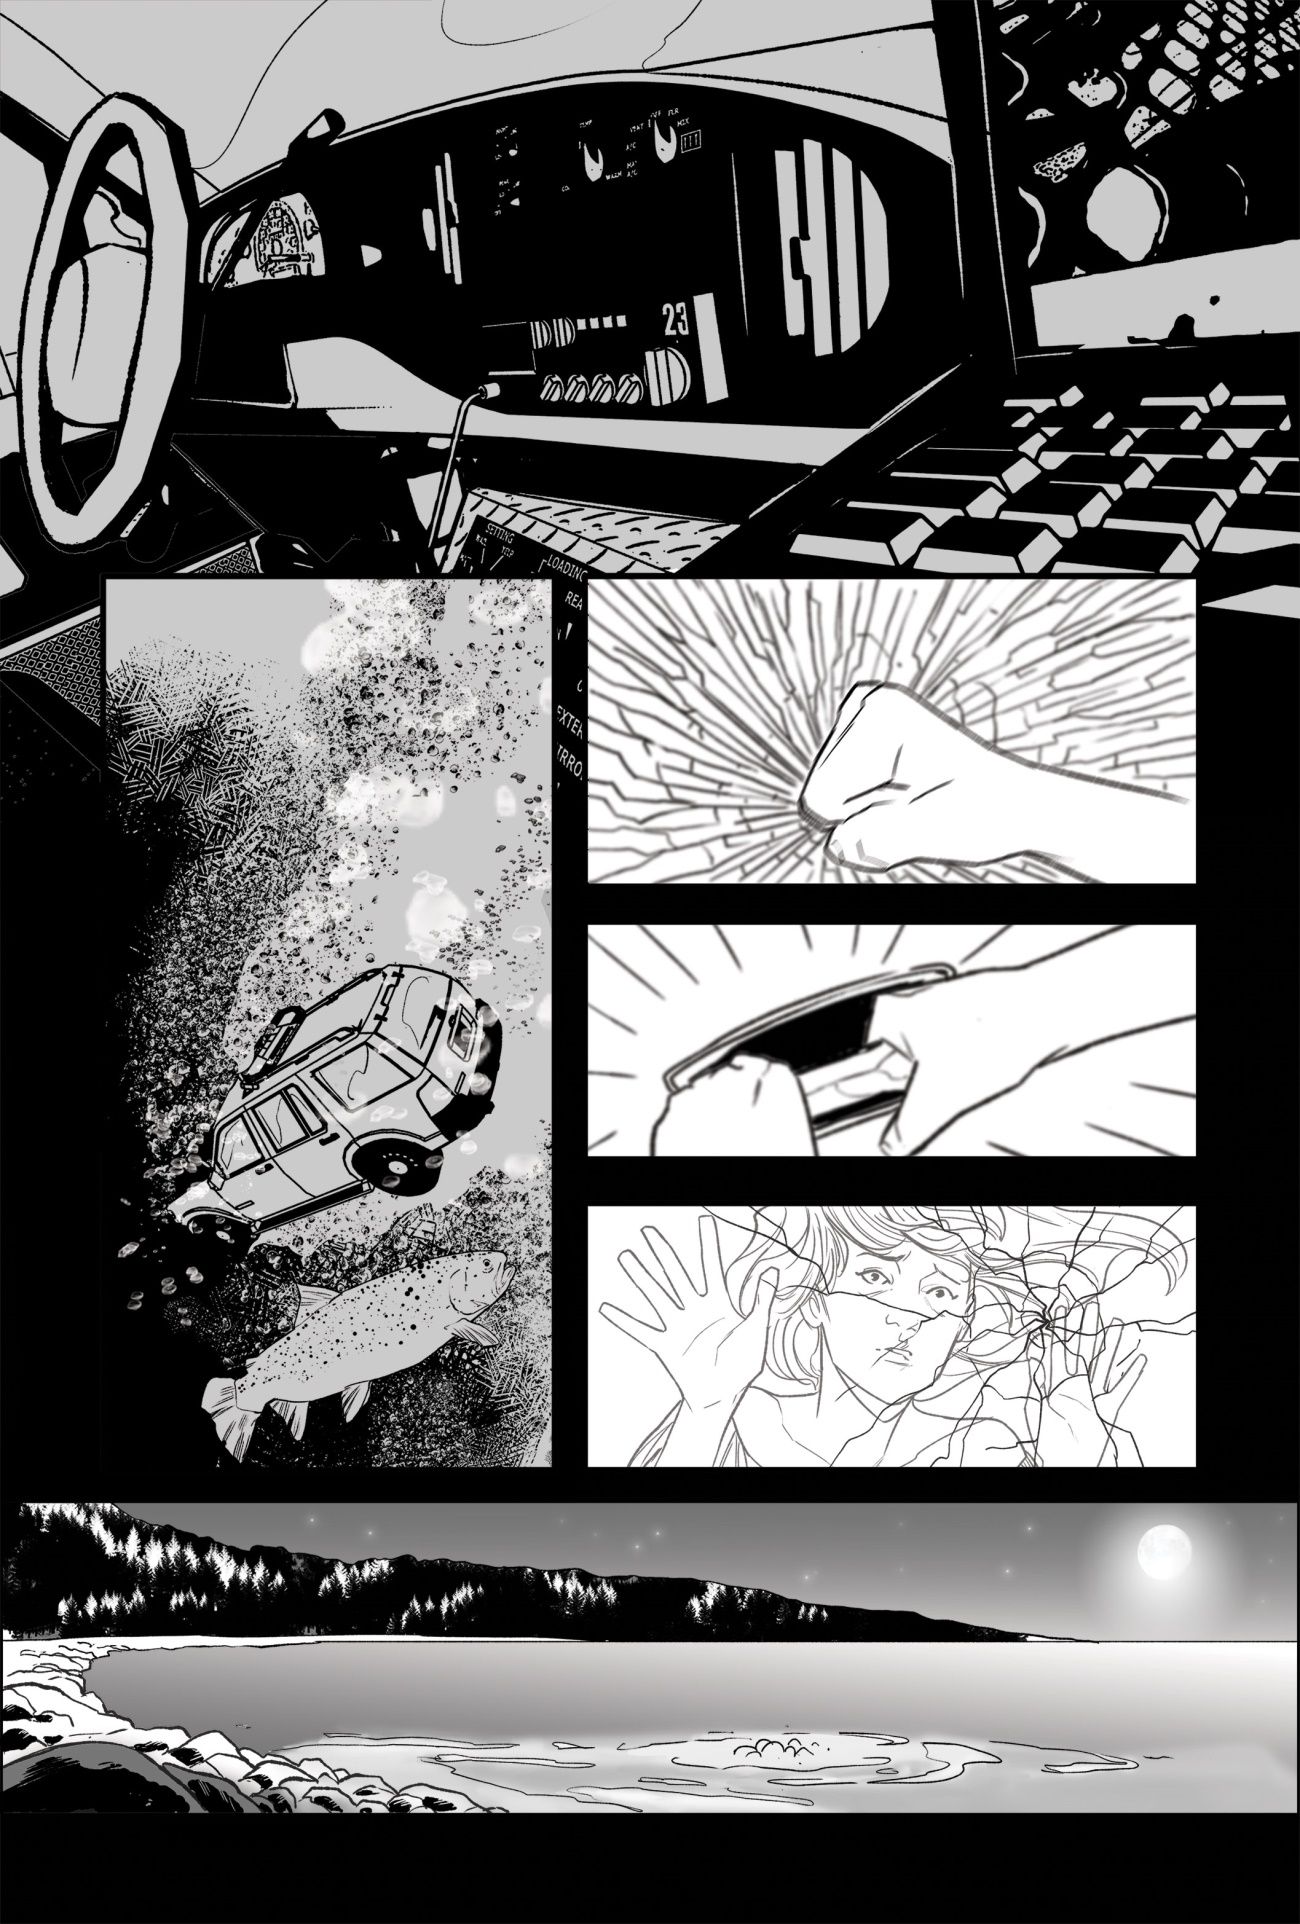 Jill and the Killers #1 from Oni Press, black & white preview page, woman trapped in car under water